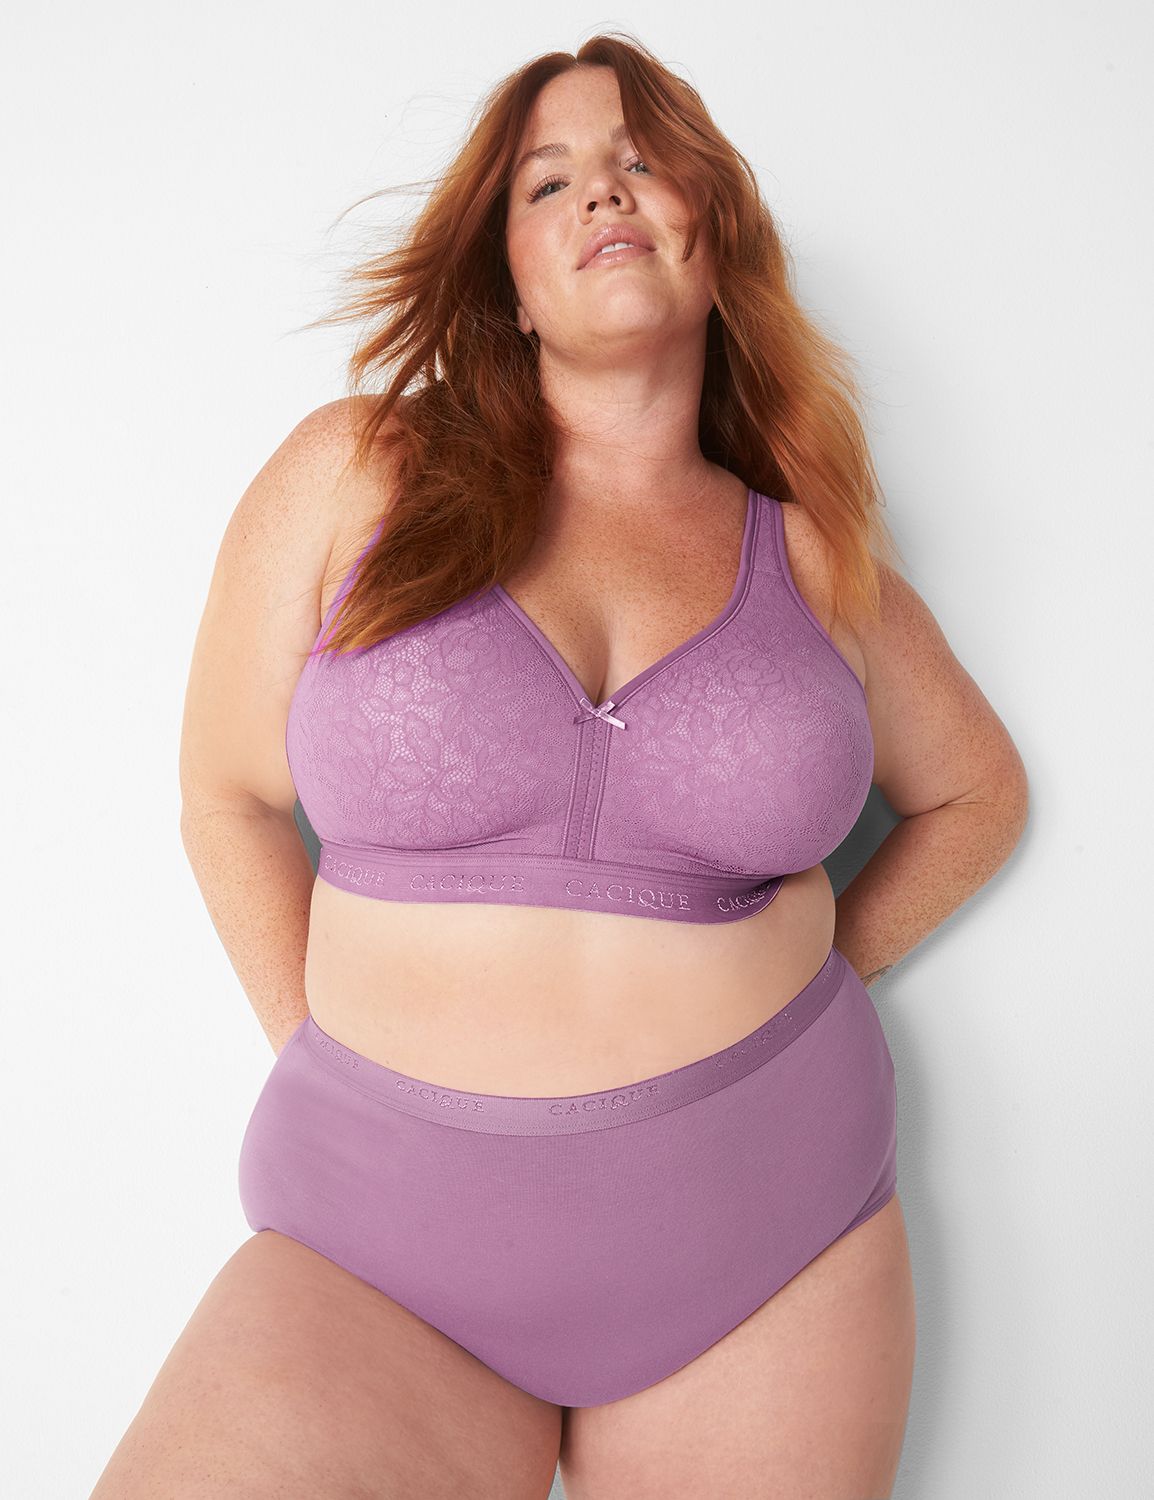 Lane Bryant - This holiday panty party just got merrier! 8 for $35